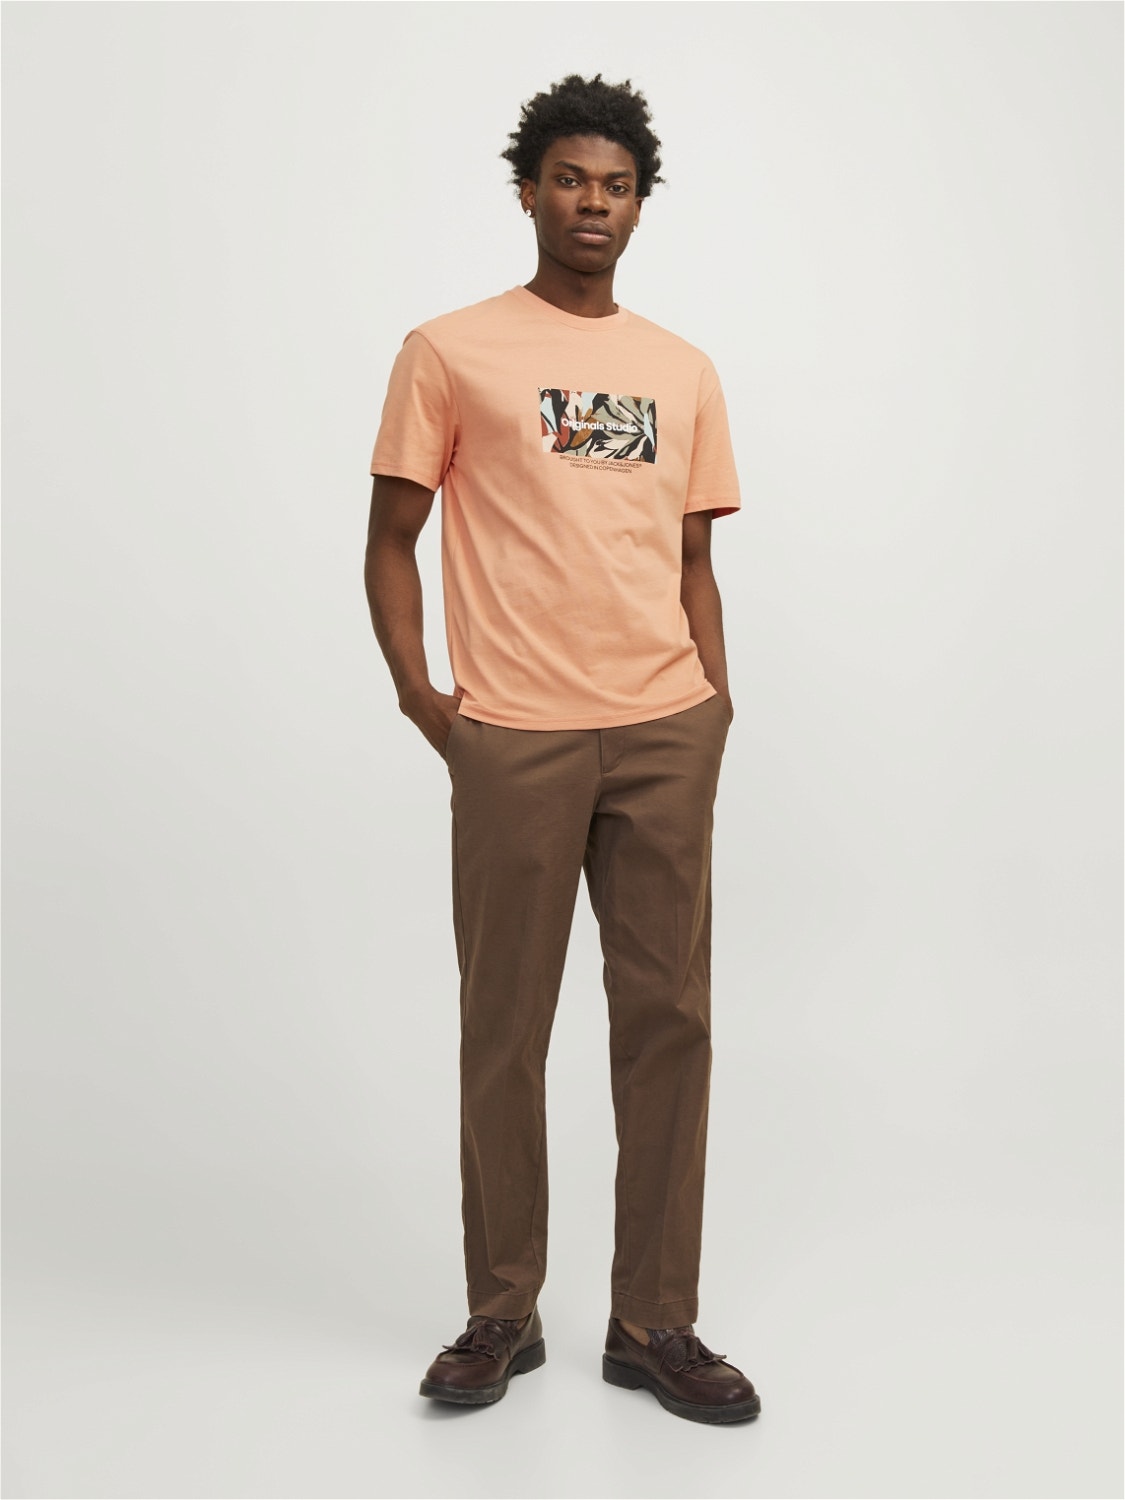 Jack & Jones Relaxed Fit Crew neck T-Shirt -Canyon Sunset - 12256717